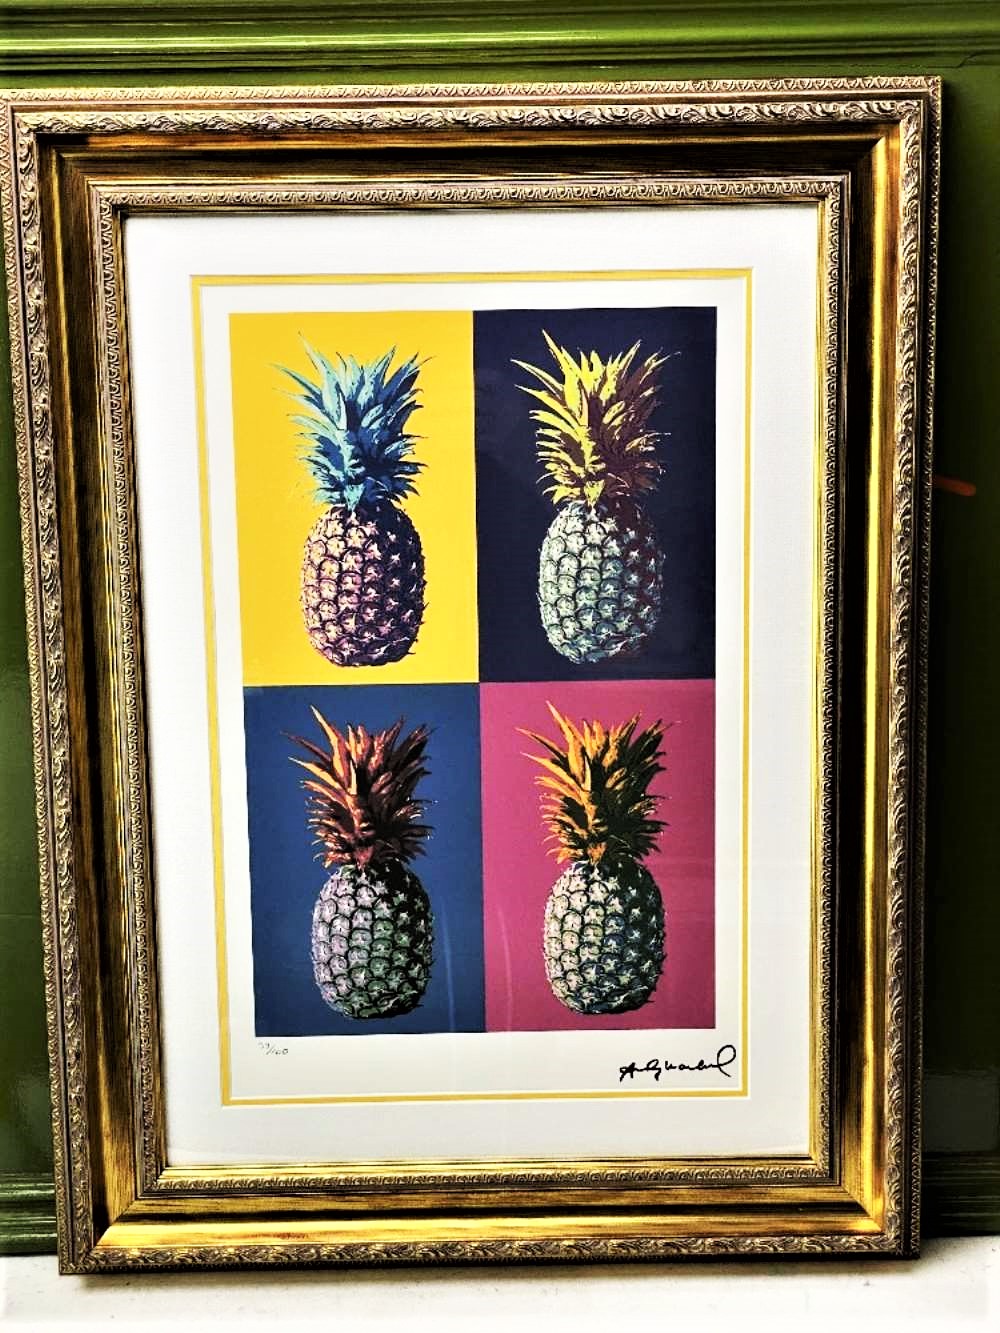 Andy Warhol-(1928-1987) "Pineapple"Castelli NY Original Numbered Lithograph #21/100, Ornate Framed.